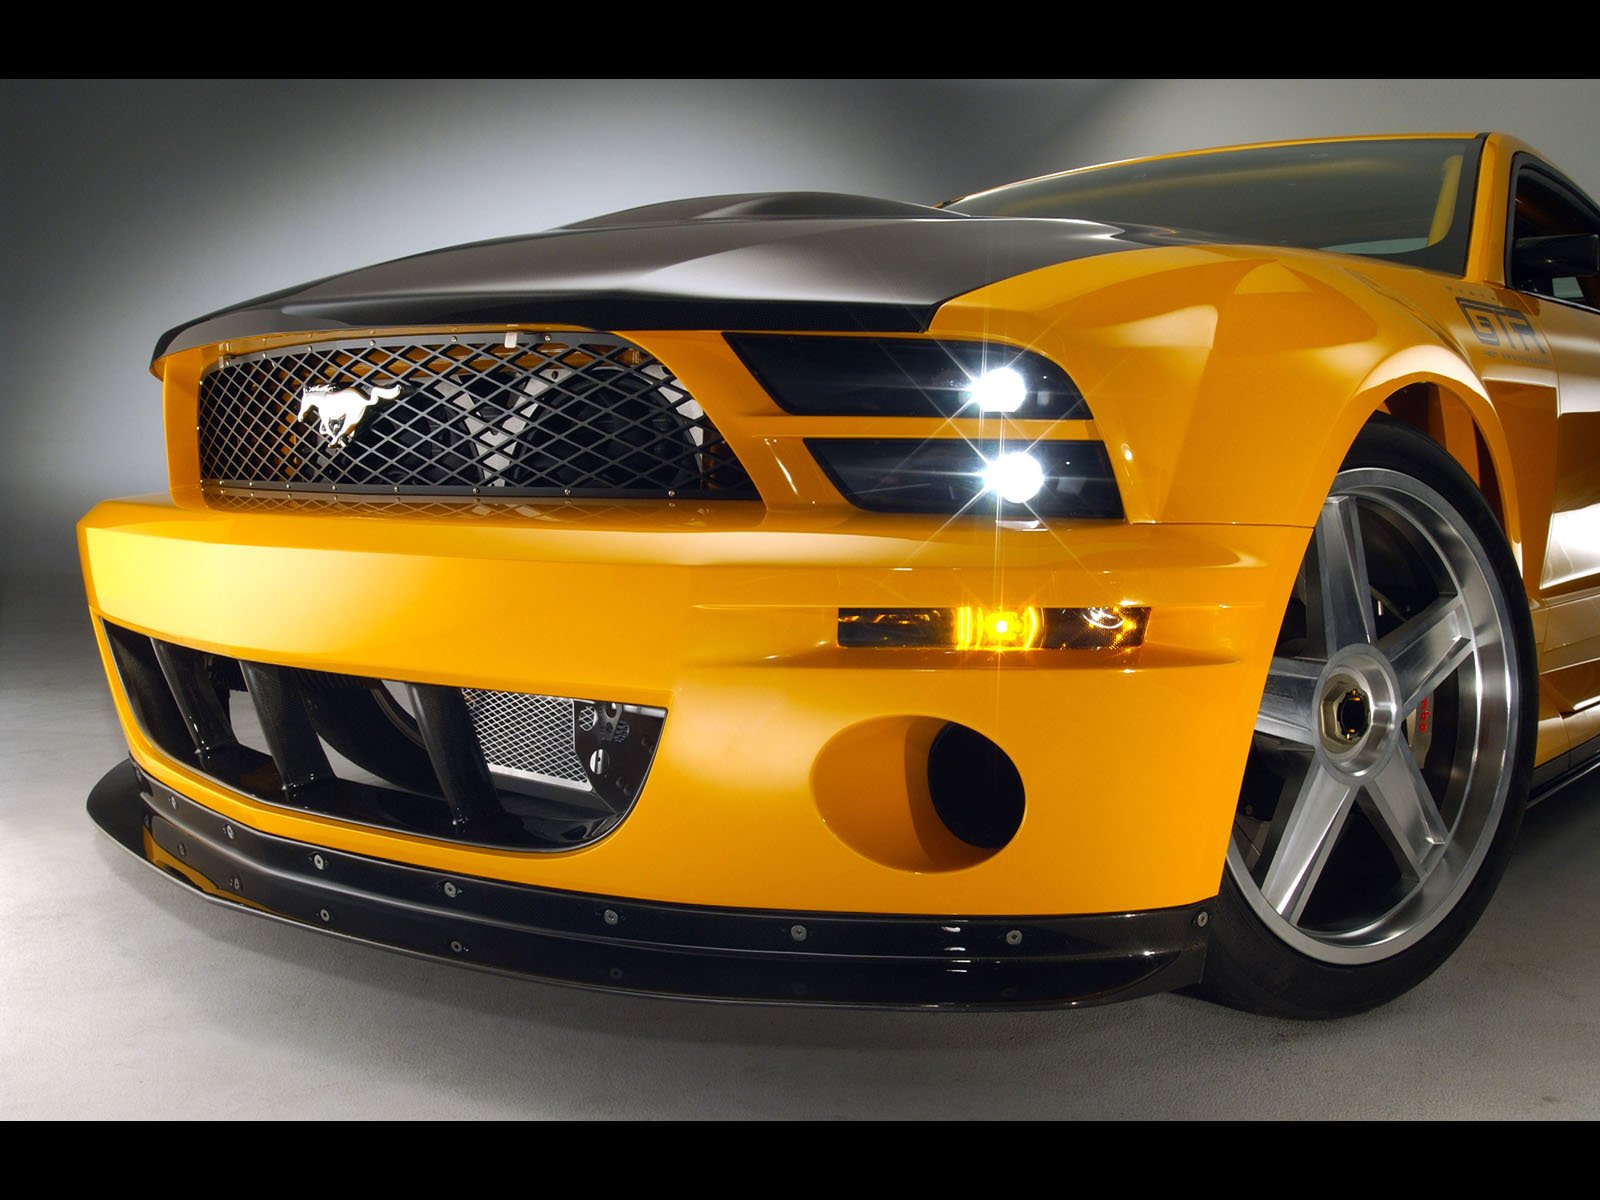 2004, Ford, Mustang, Gt r, Concept, Muscle, Supercar, Supercars, Ds Wallpaper